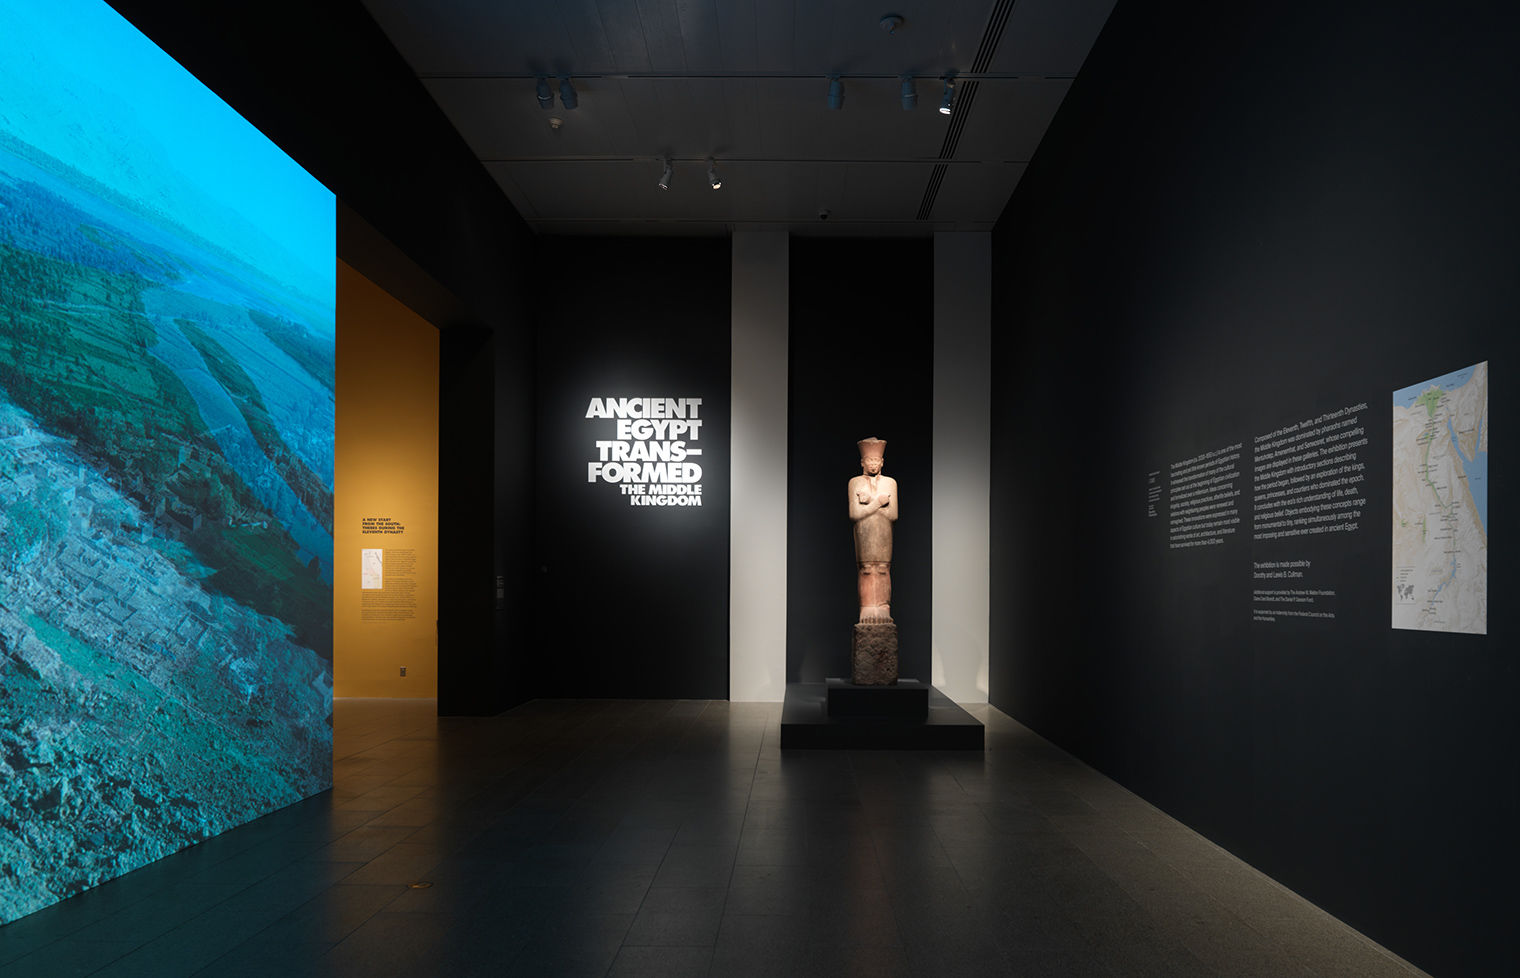 The entrance to the exhibition, Ancient Egypt Transformed, with a projection of an Egyptian landscape to the left and a statue of a king wearing a knee-length white robe and a red crown with a flat top straight ahead.